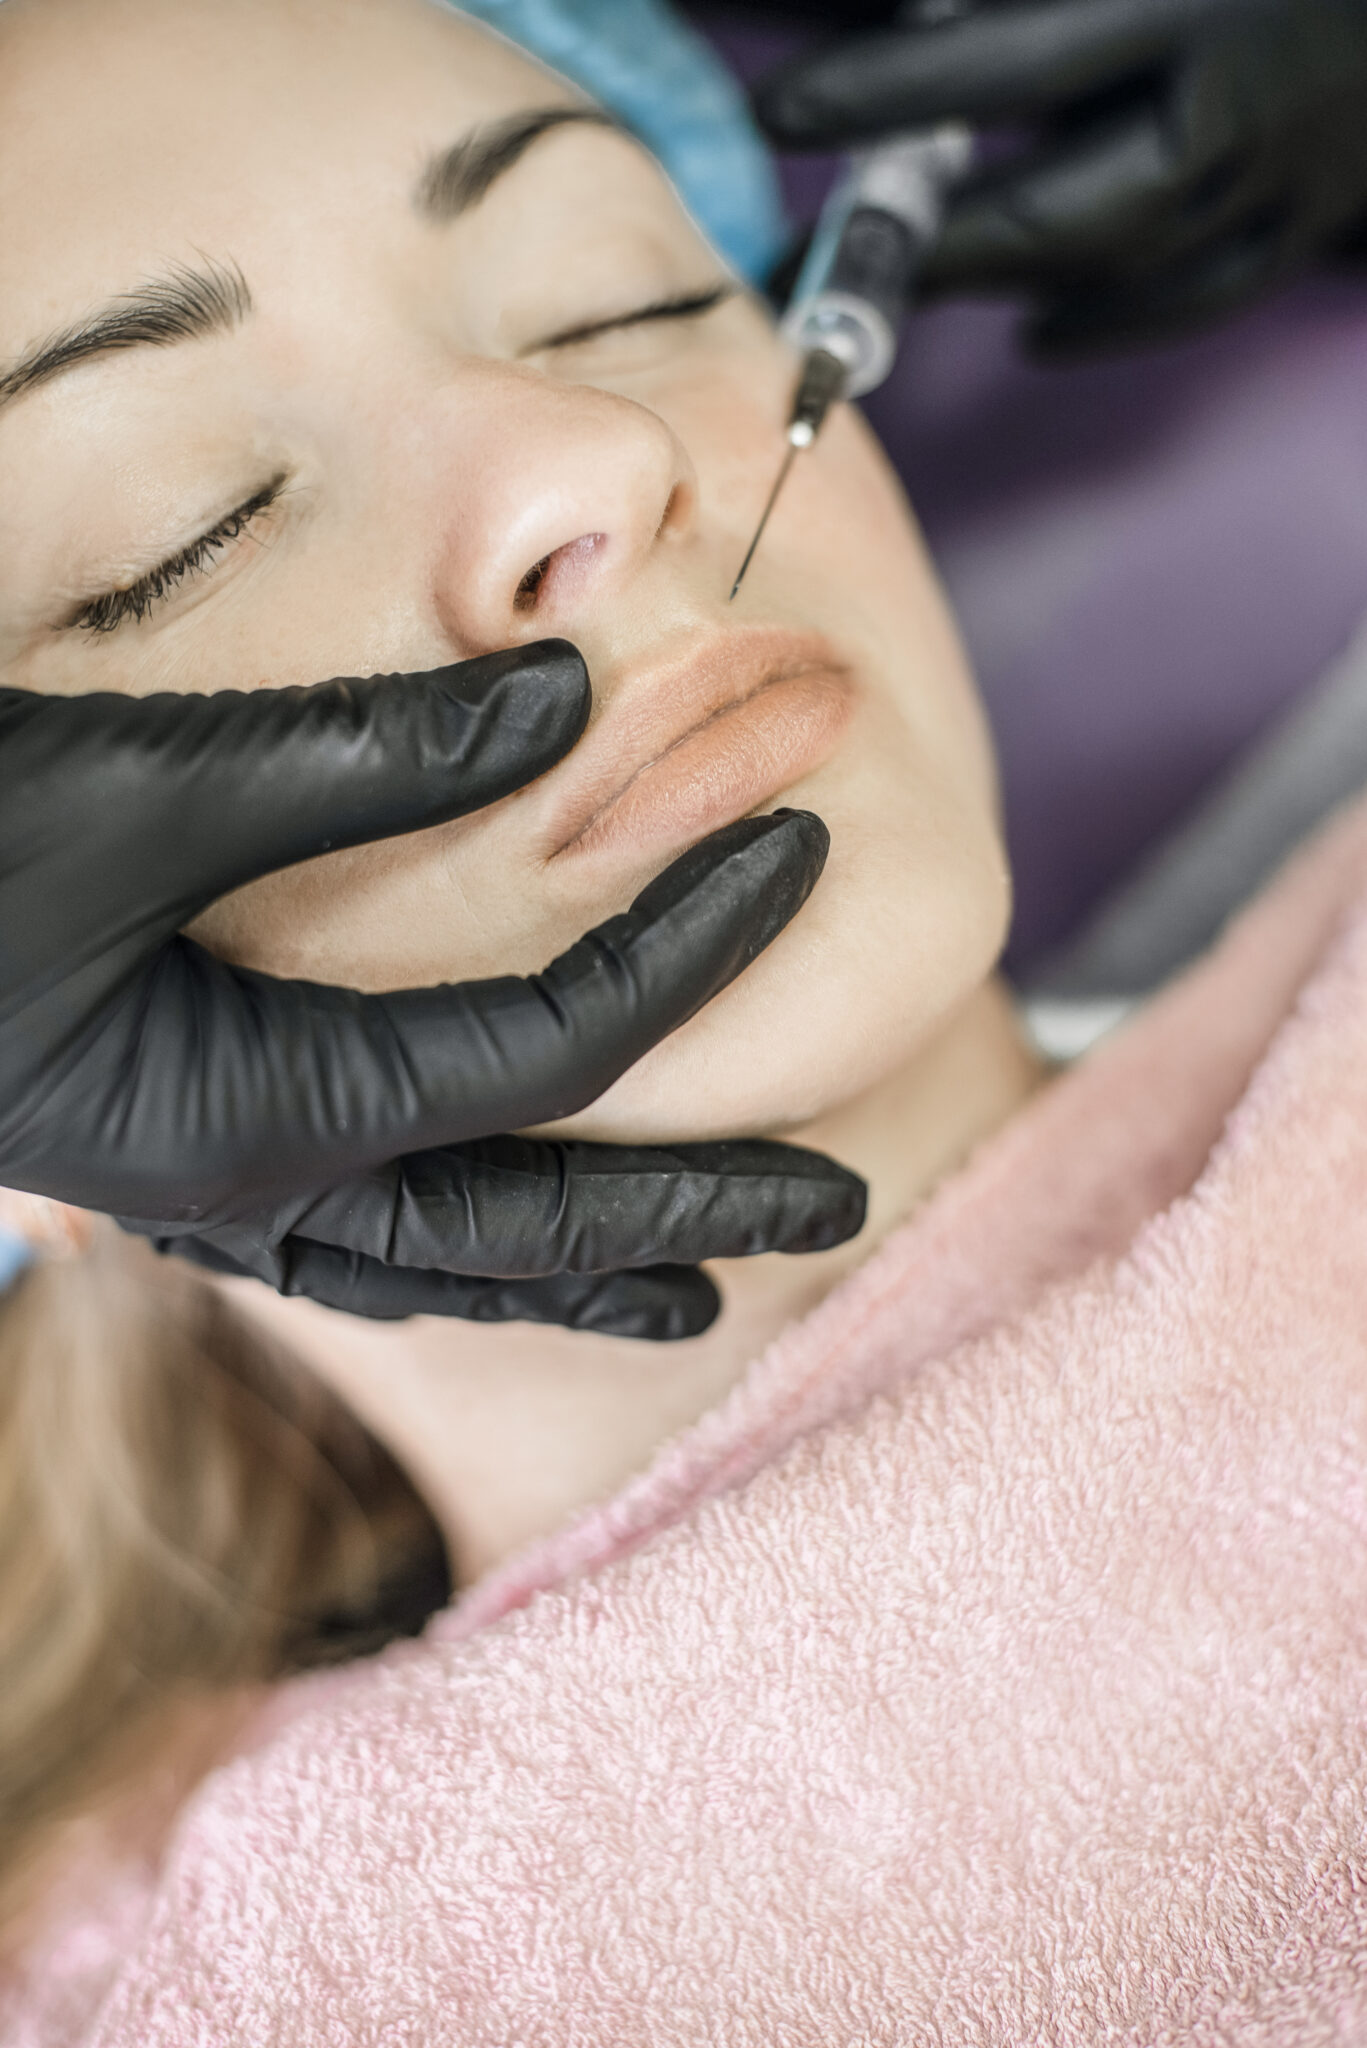 A professional adds dermal fillers to a woman's lips.